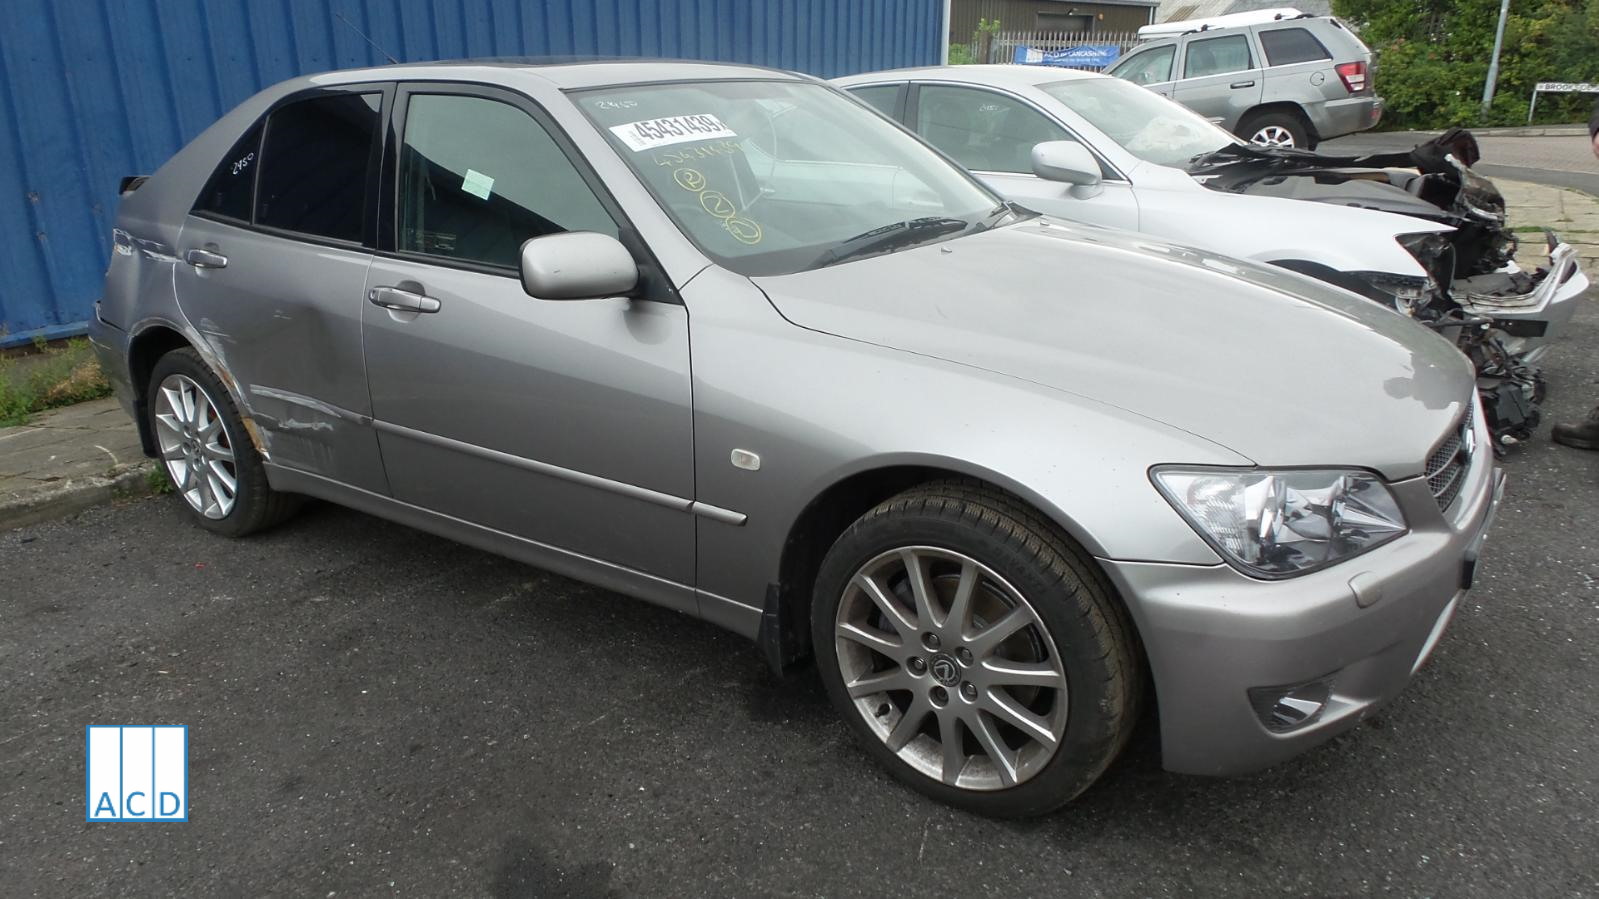 LEXUS IS200 LE used spares